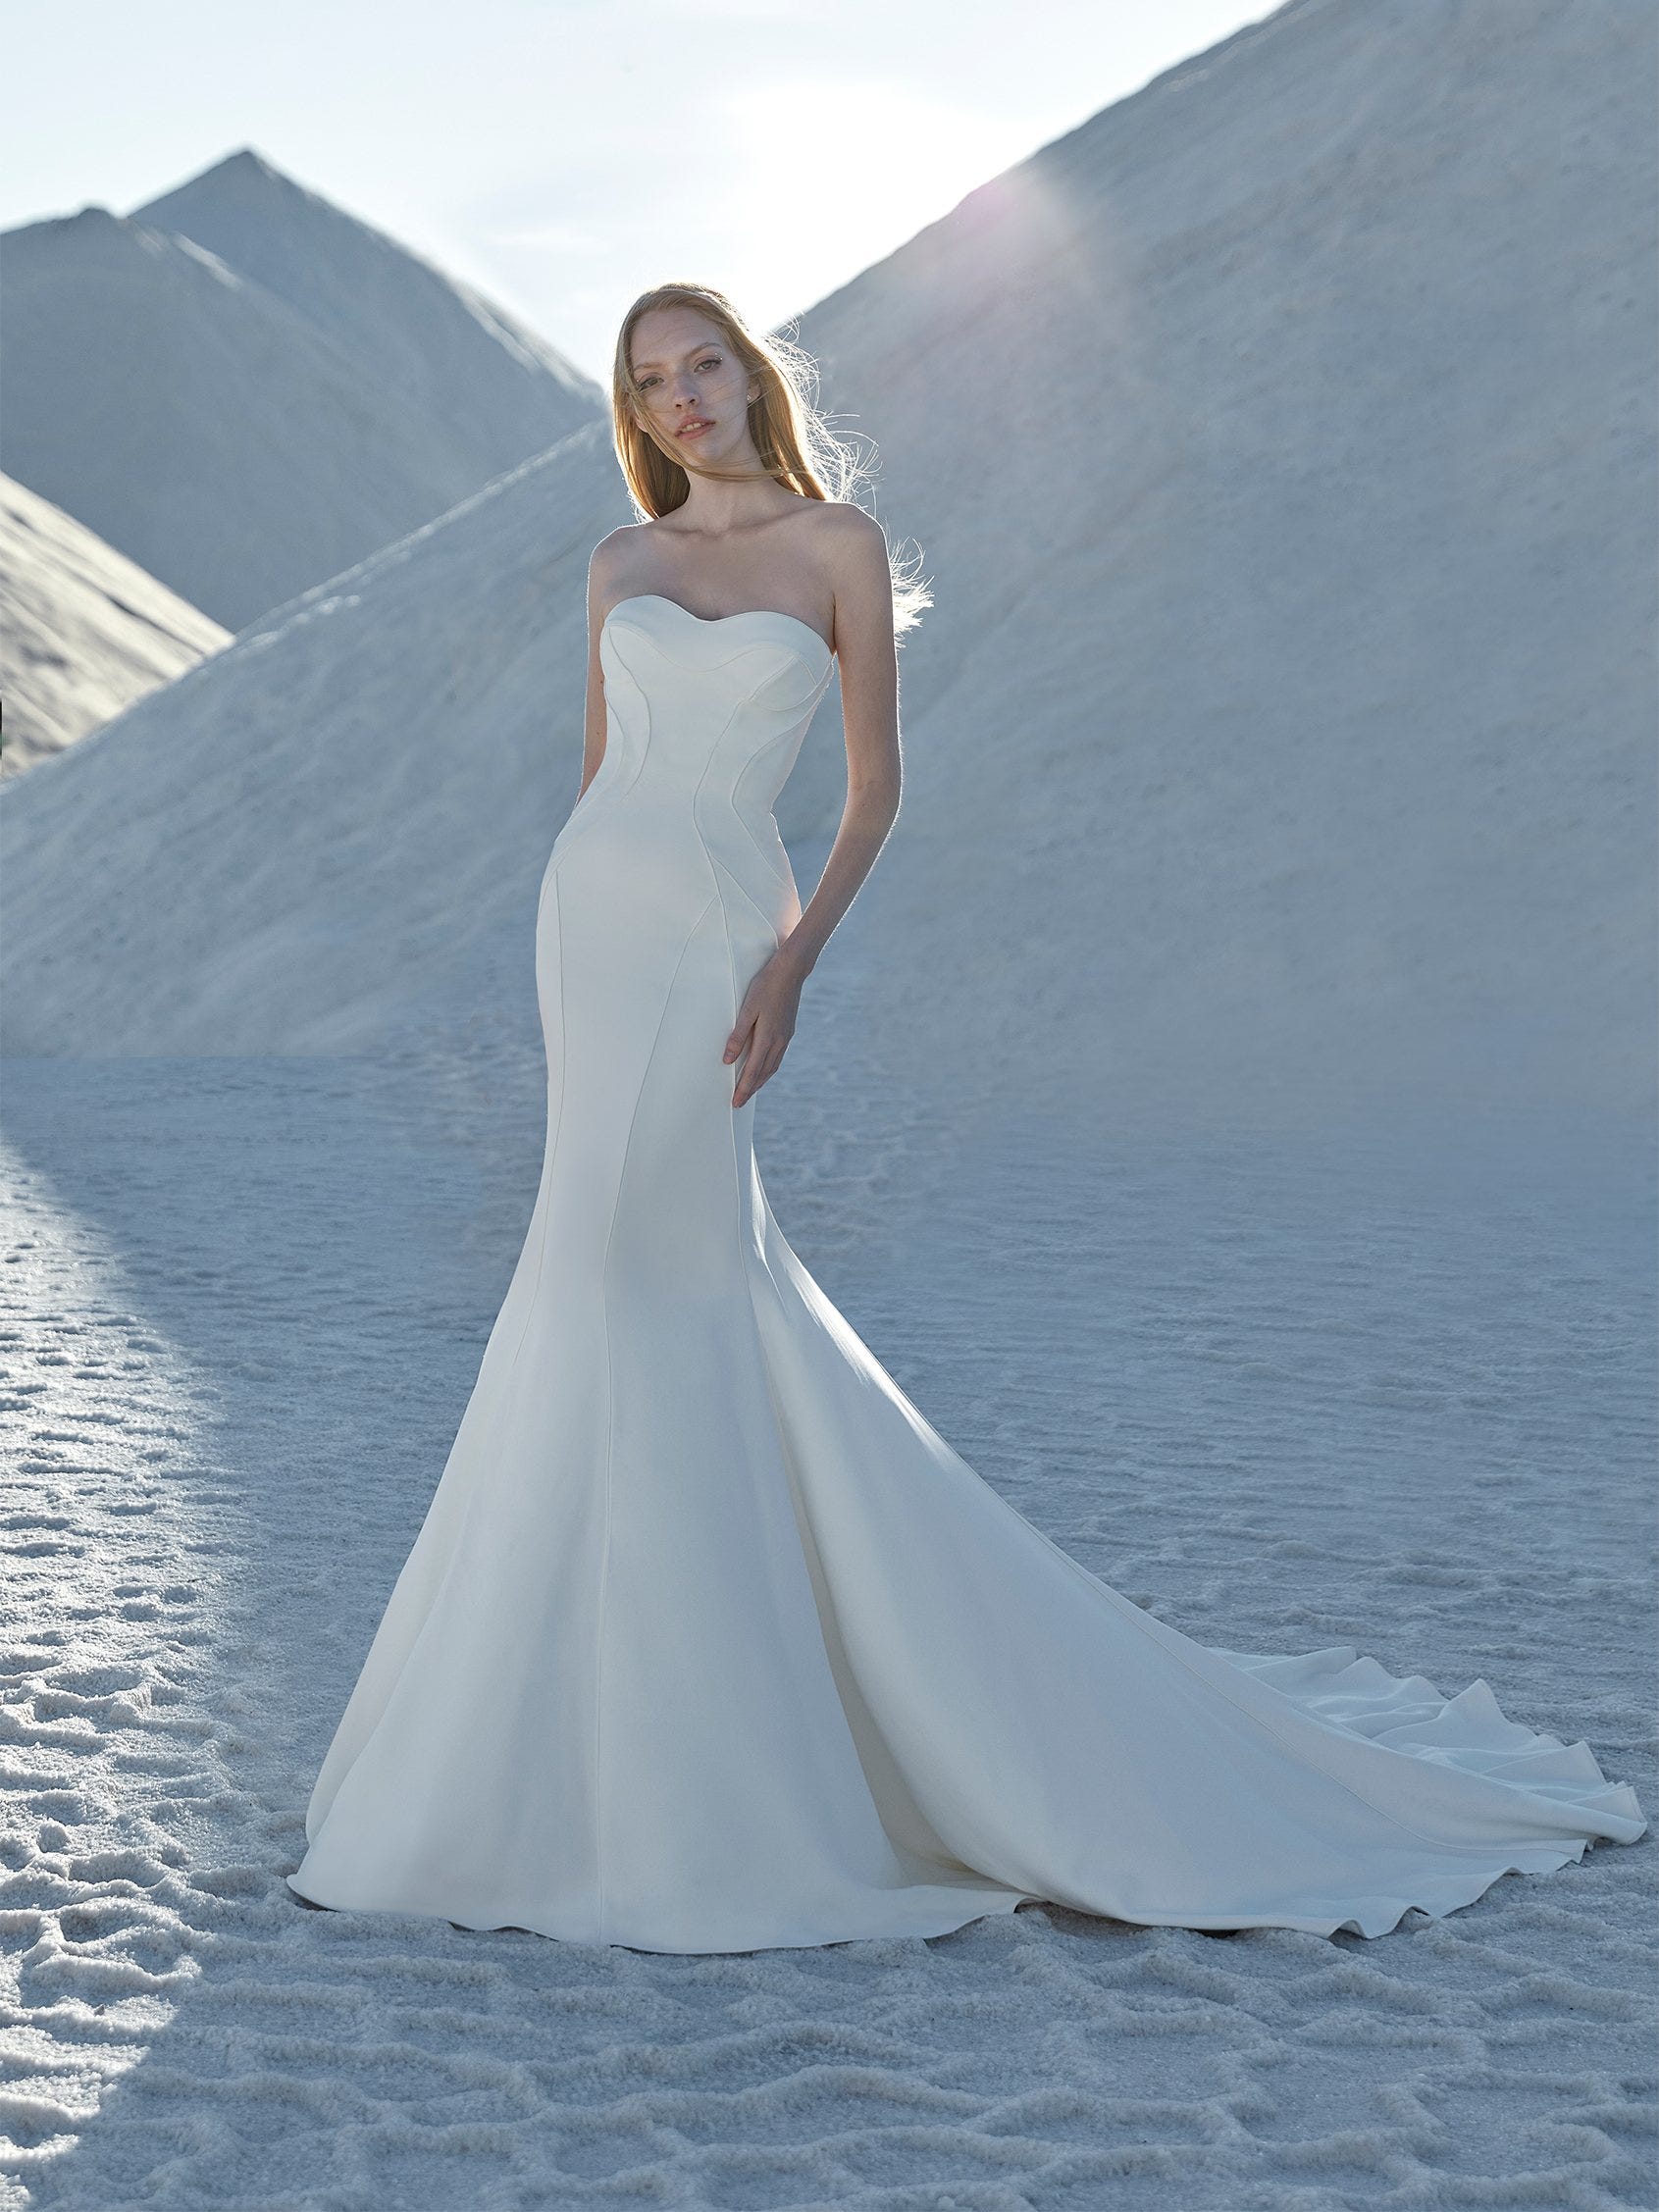 Couture Wedding Dresses & Luxury Apparel